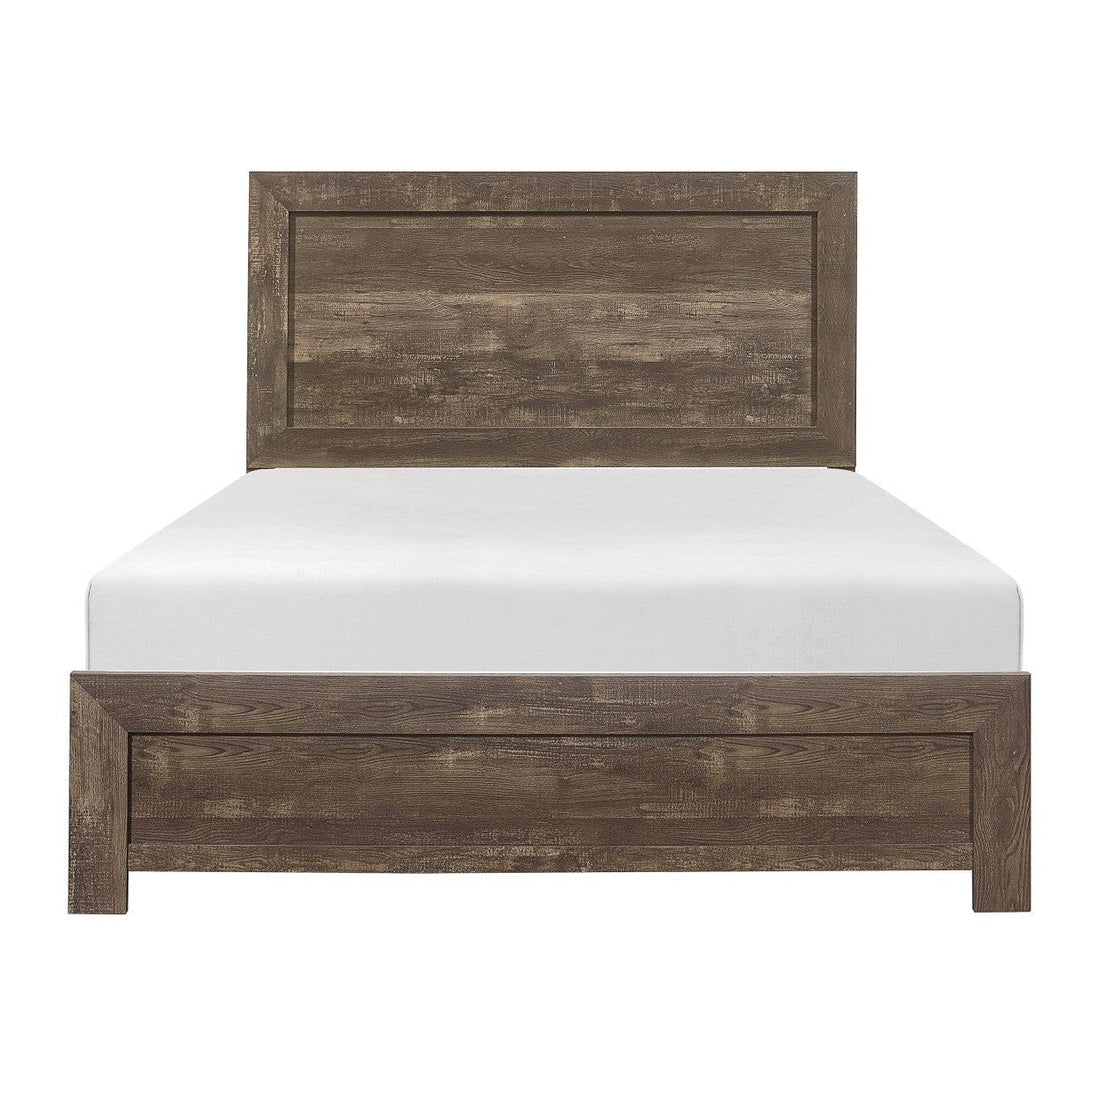 California King Bed in a Box 1534K-1CK